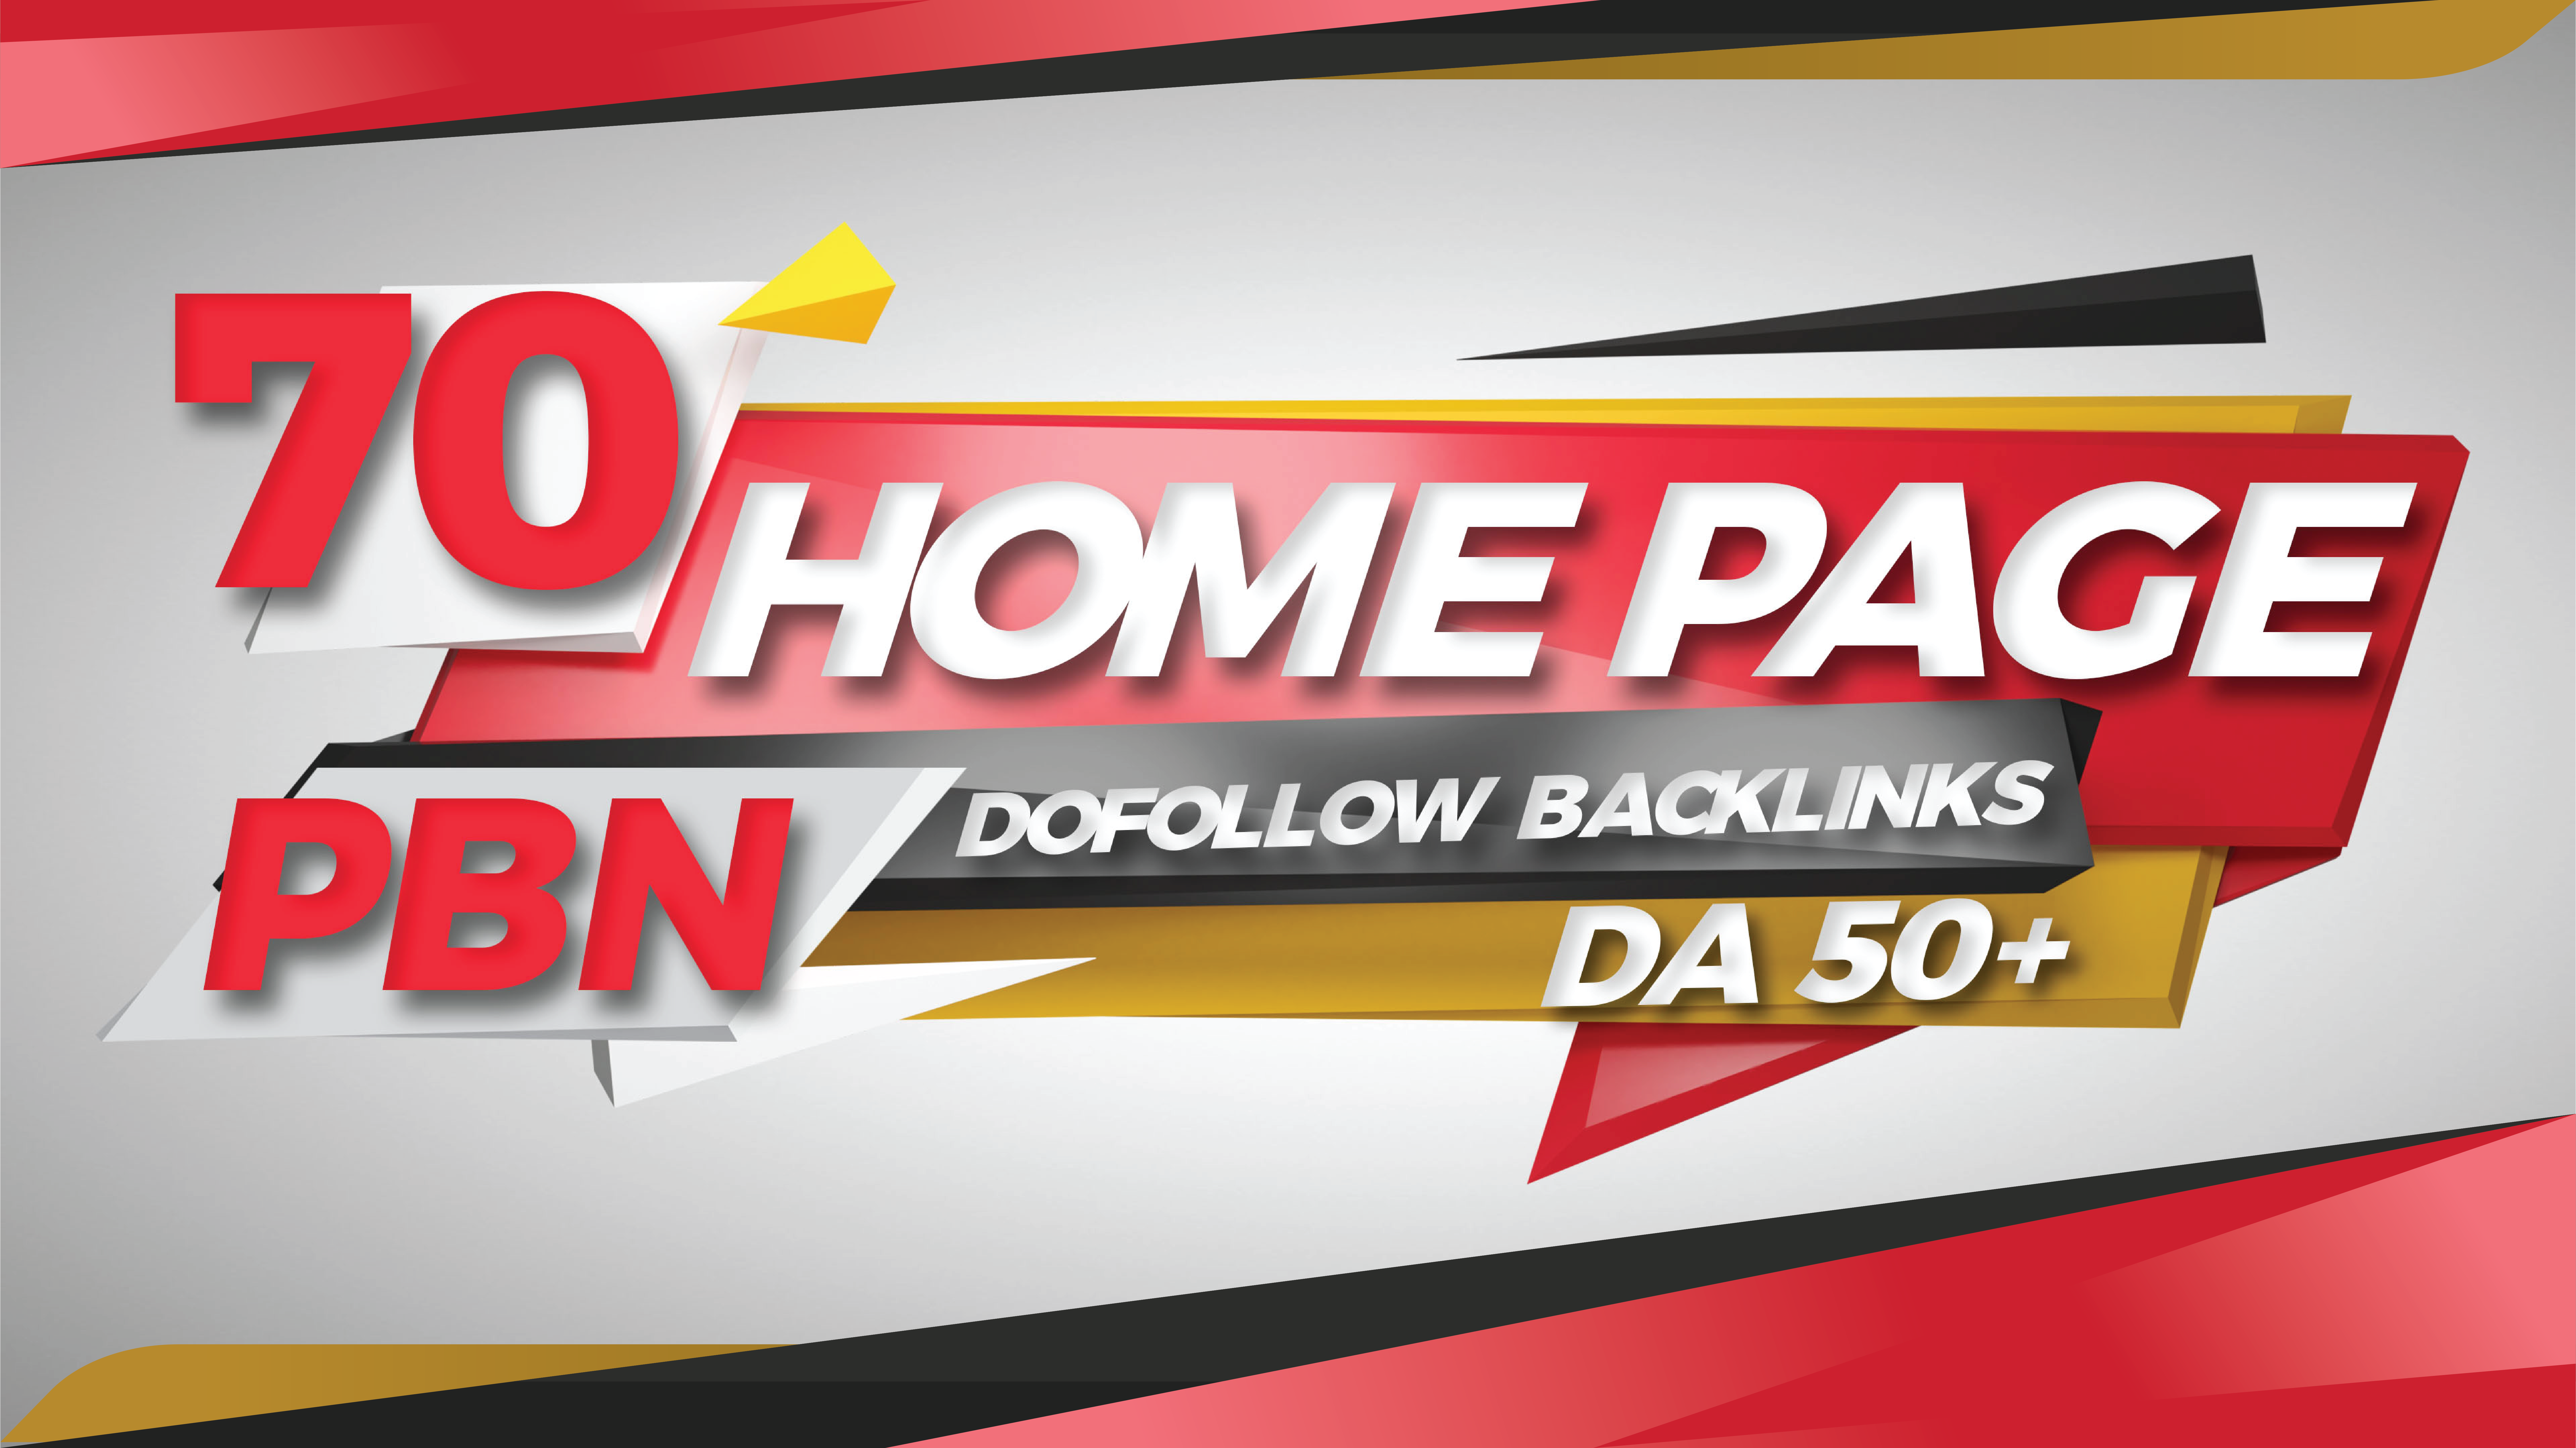 Get manual and High authority permanent Homepage PBNs 70 backlinks DA 50+